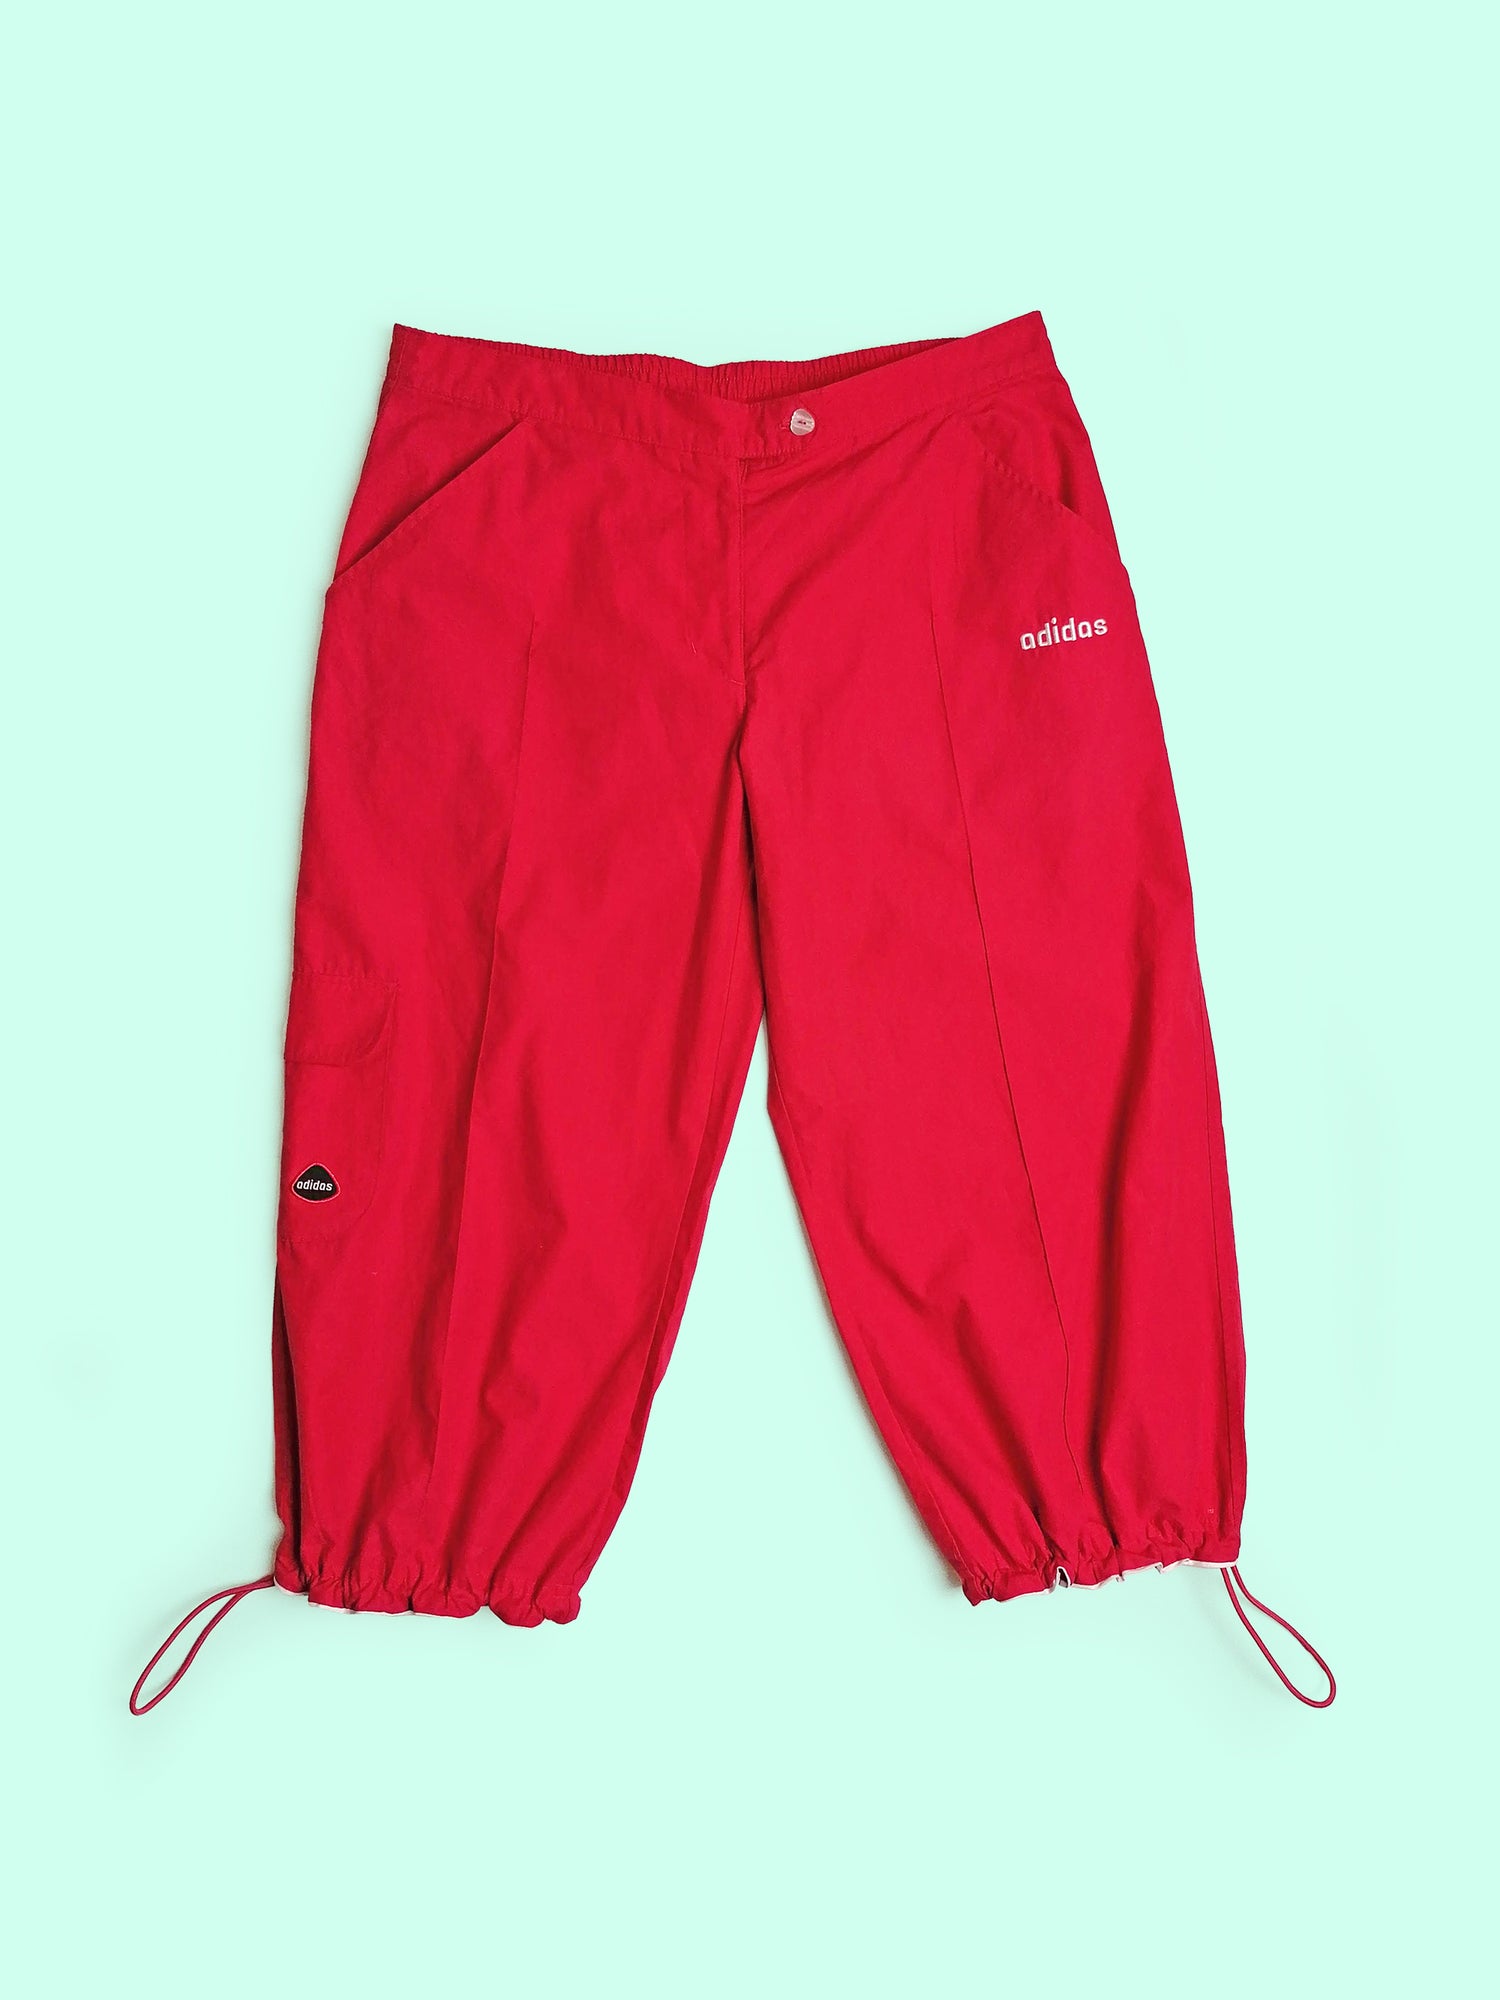 Men's Track Pants – Affiliated Sports Group / Groupe Sport Affiliated